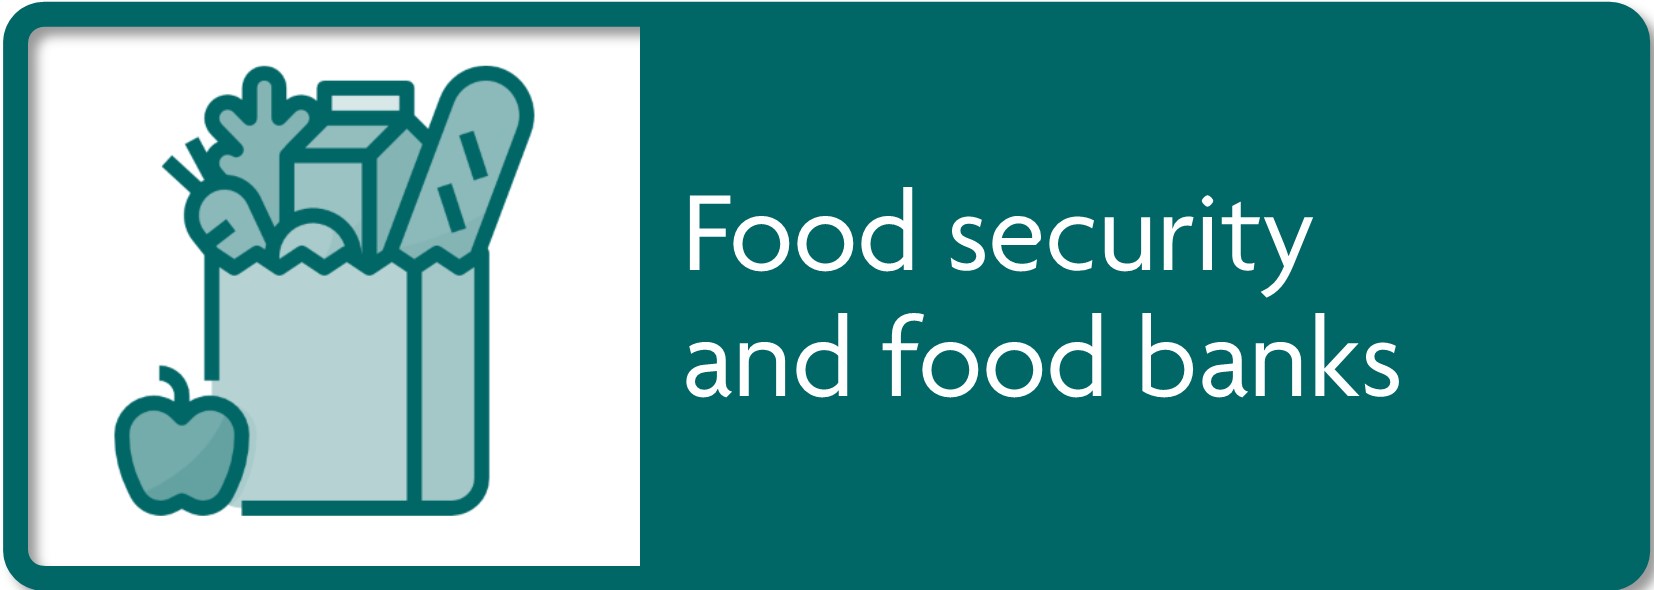 Food security and food banks